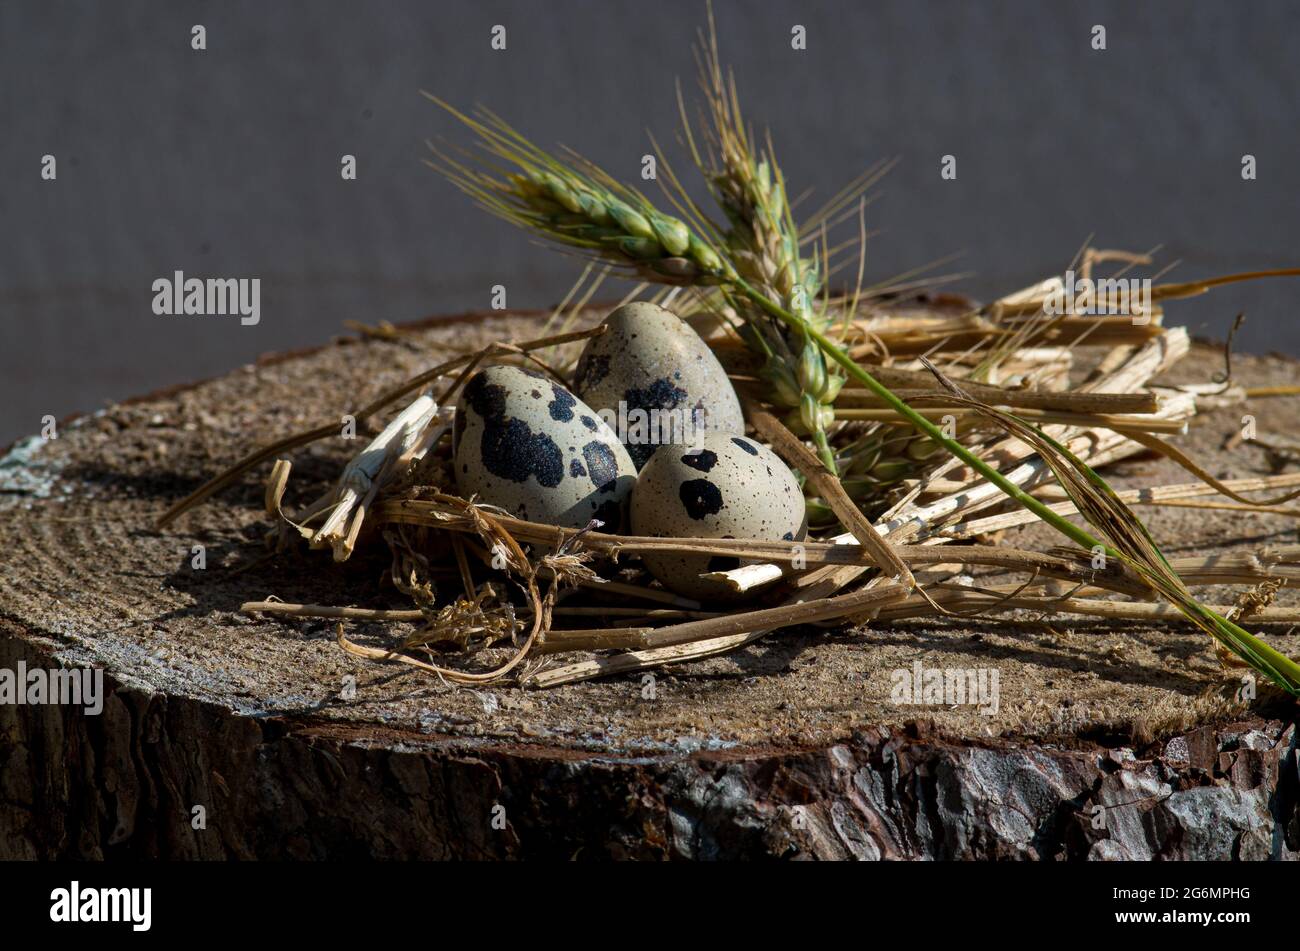 Quail egg layed on a wheat nest over a wood section for organic agriculture Stock Photo